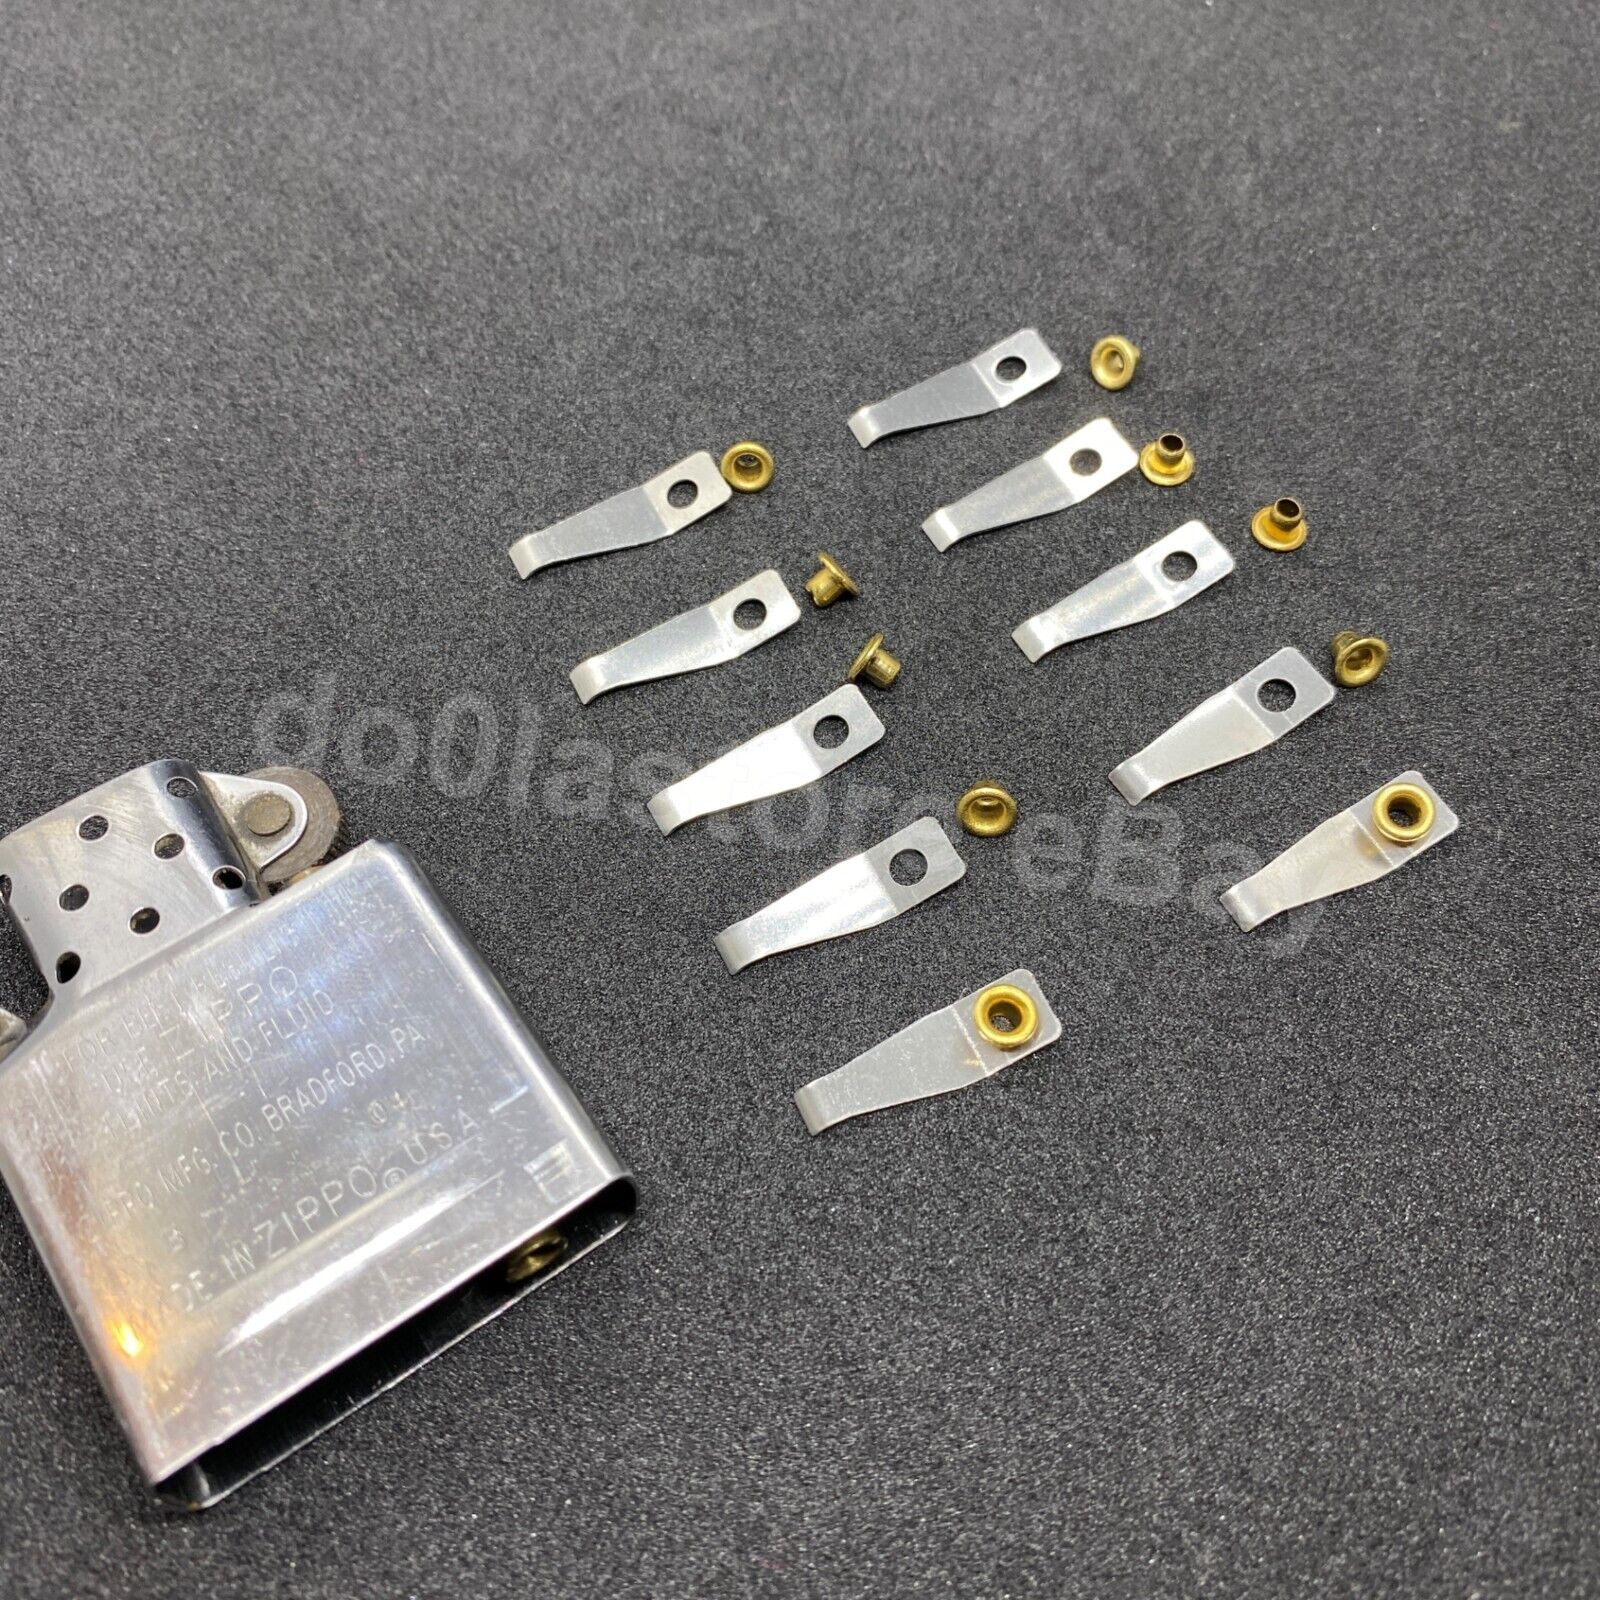 For Zippo lighters, 10 cam sheet spring rivets set for repairs and replacement